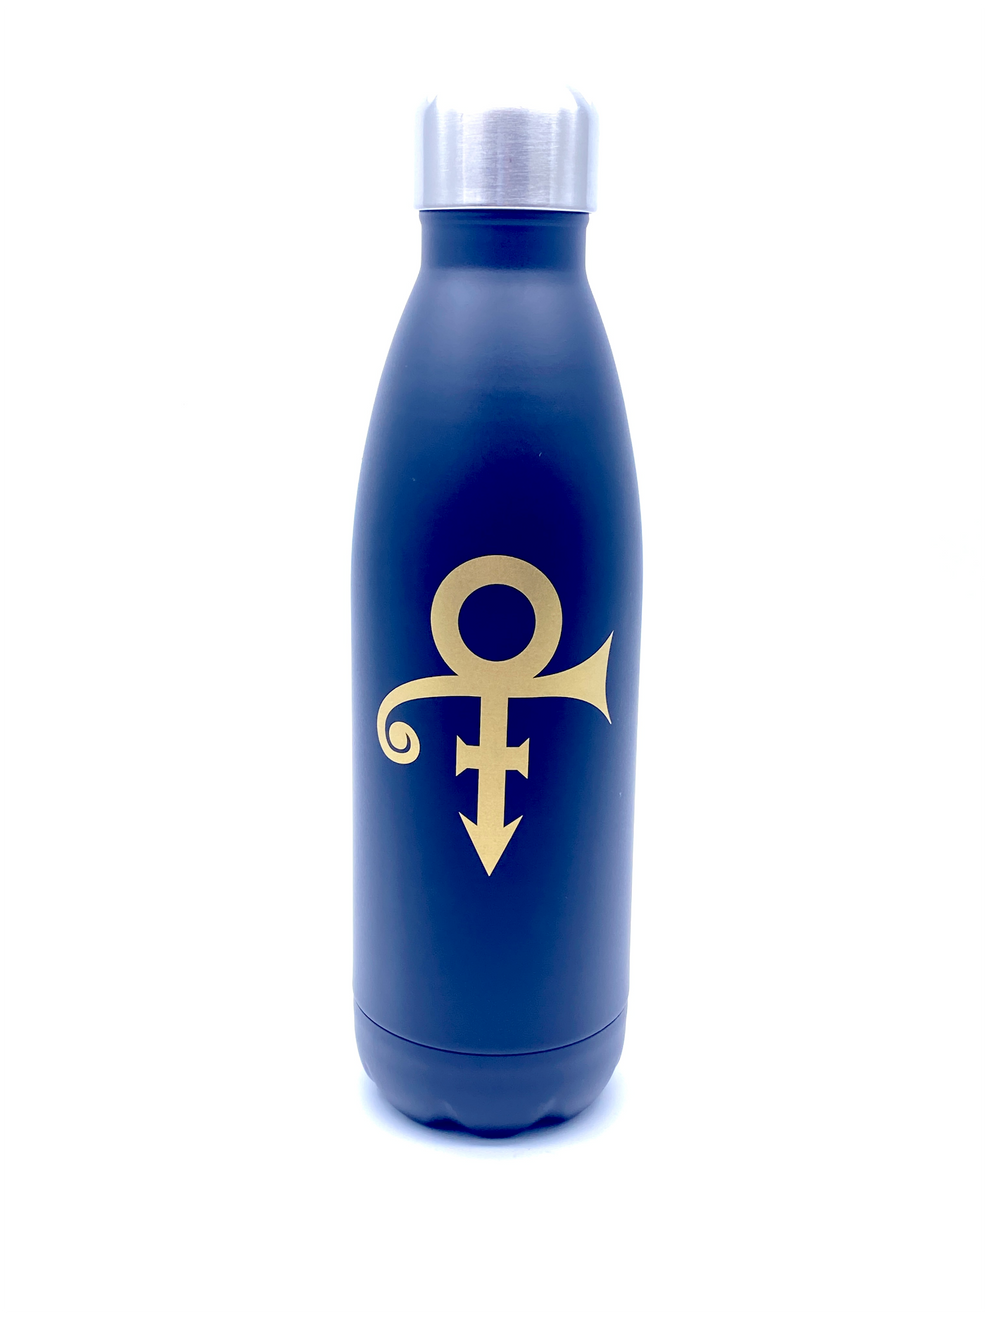 Prince – Official Aluminium Drinks Flask Black With Gold Love Symbol Brand New